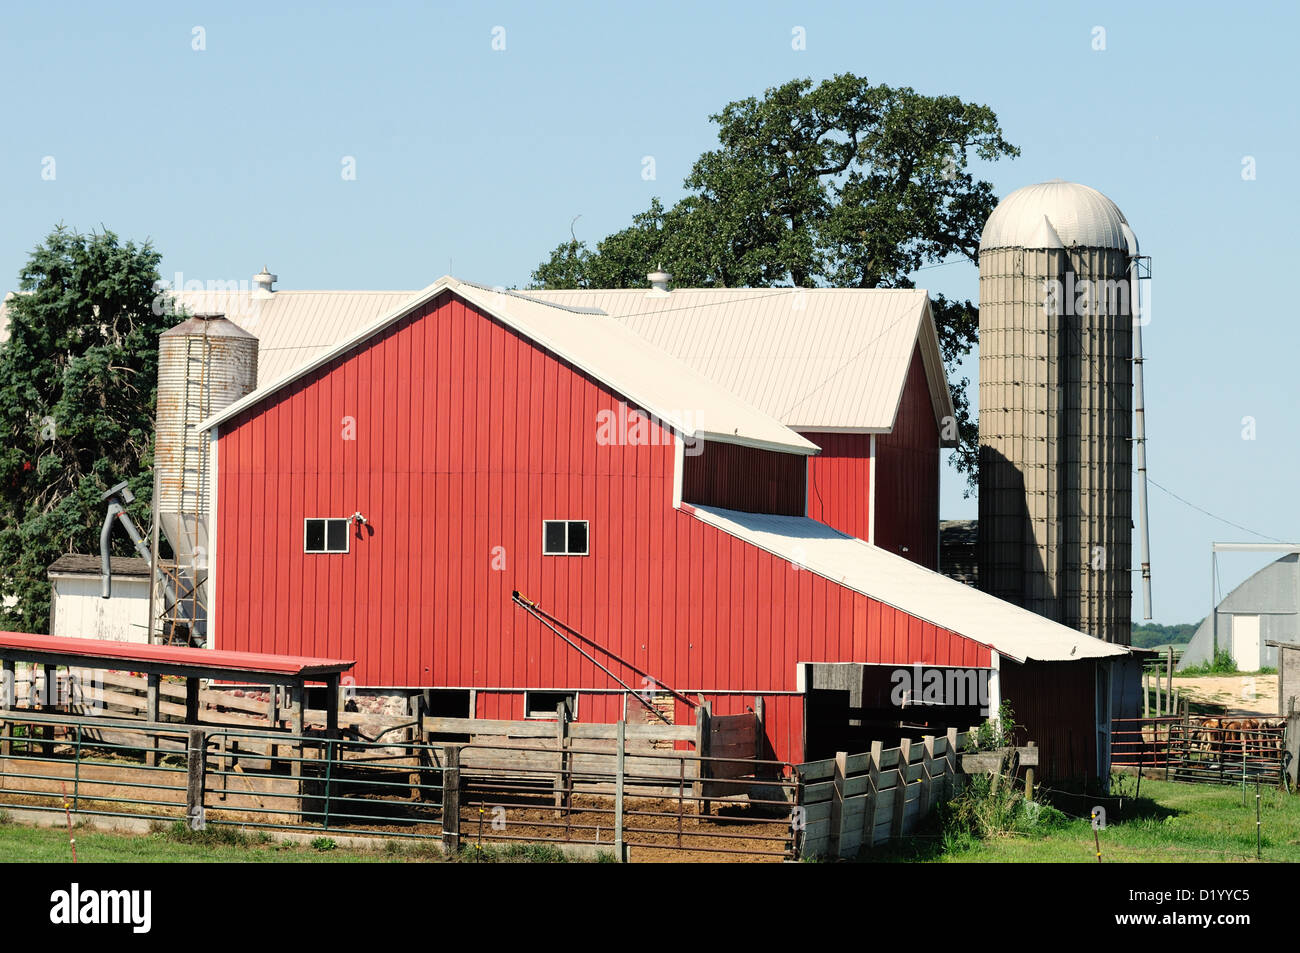 Agriculture well-maintained working livestock barn in Illinois, USA. Stock Photo